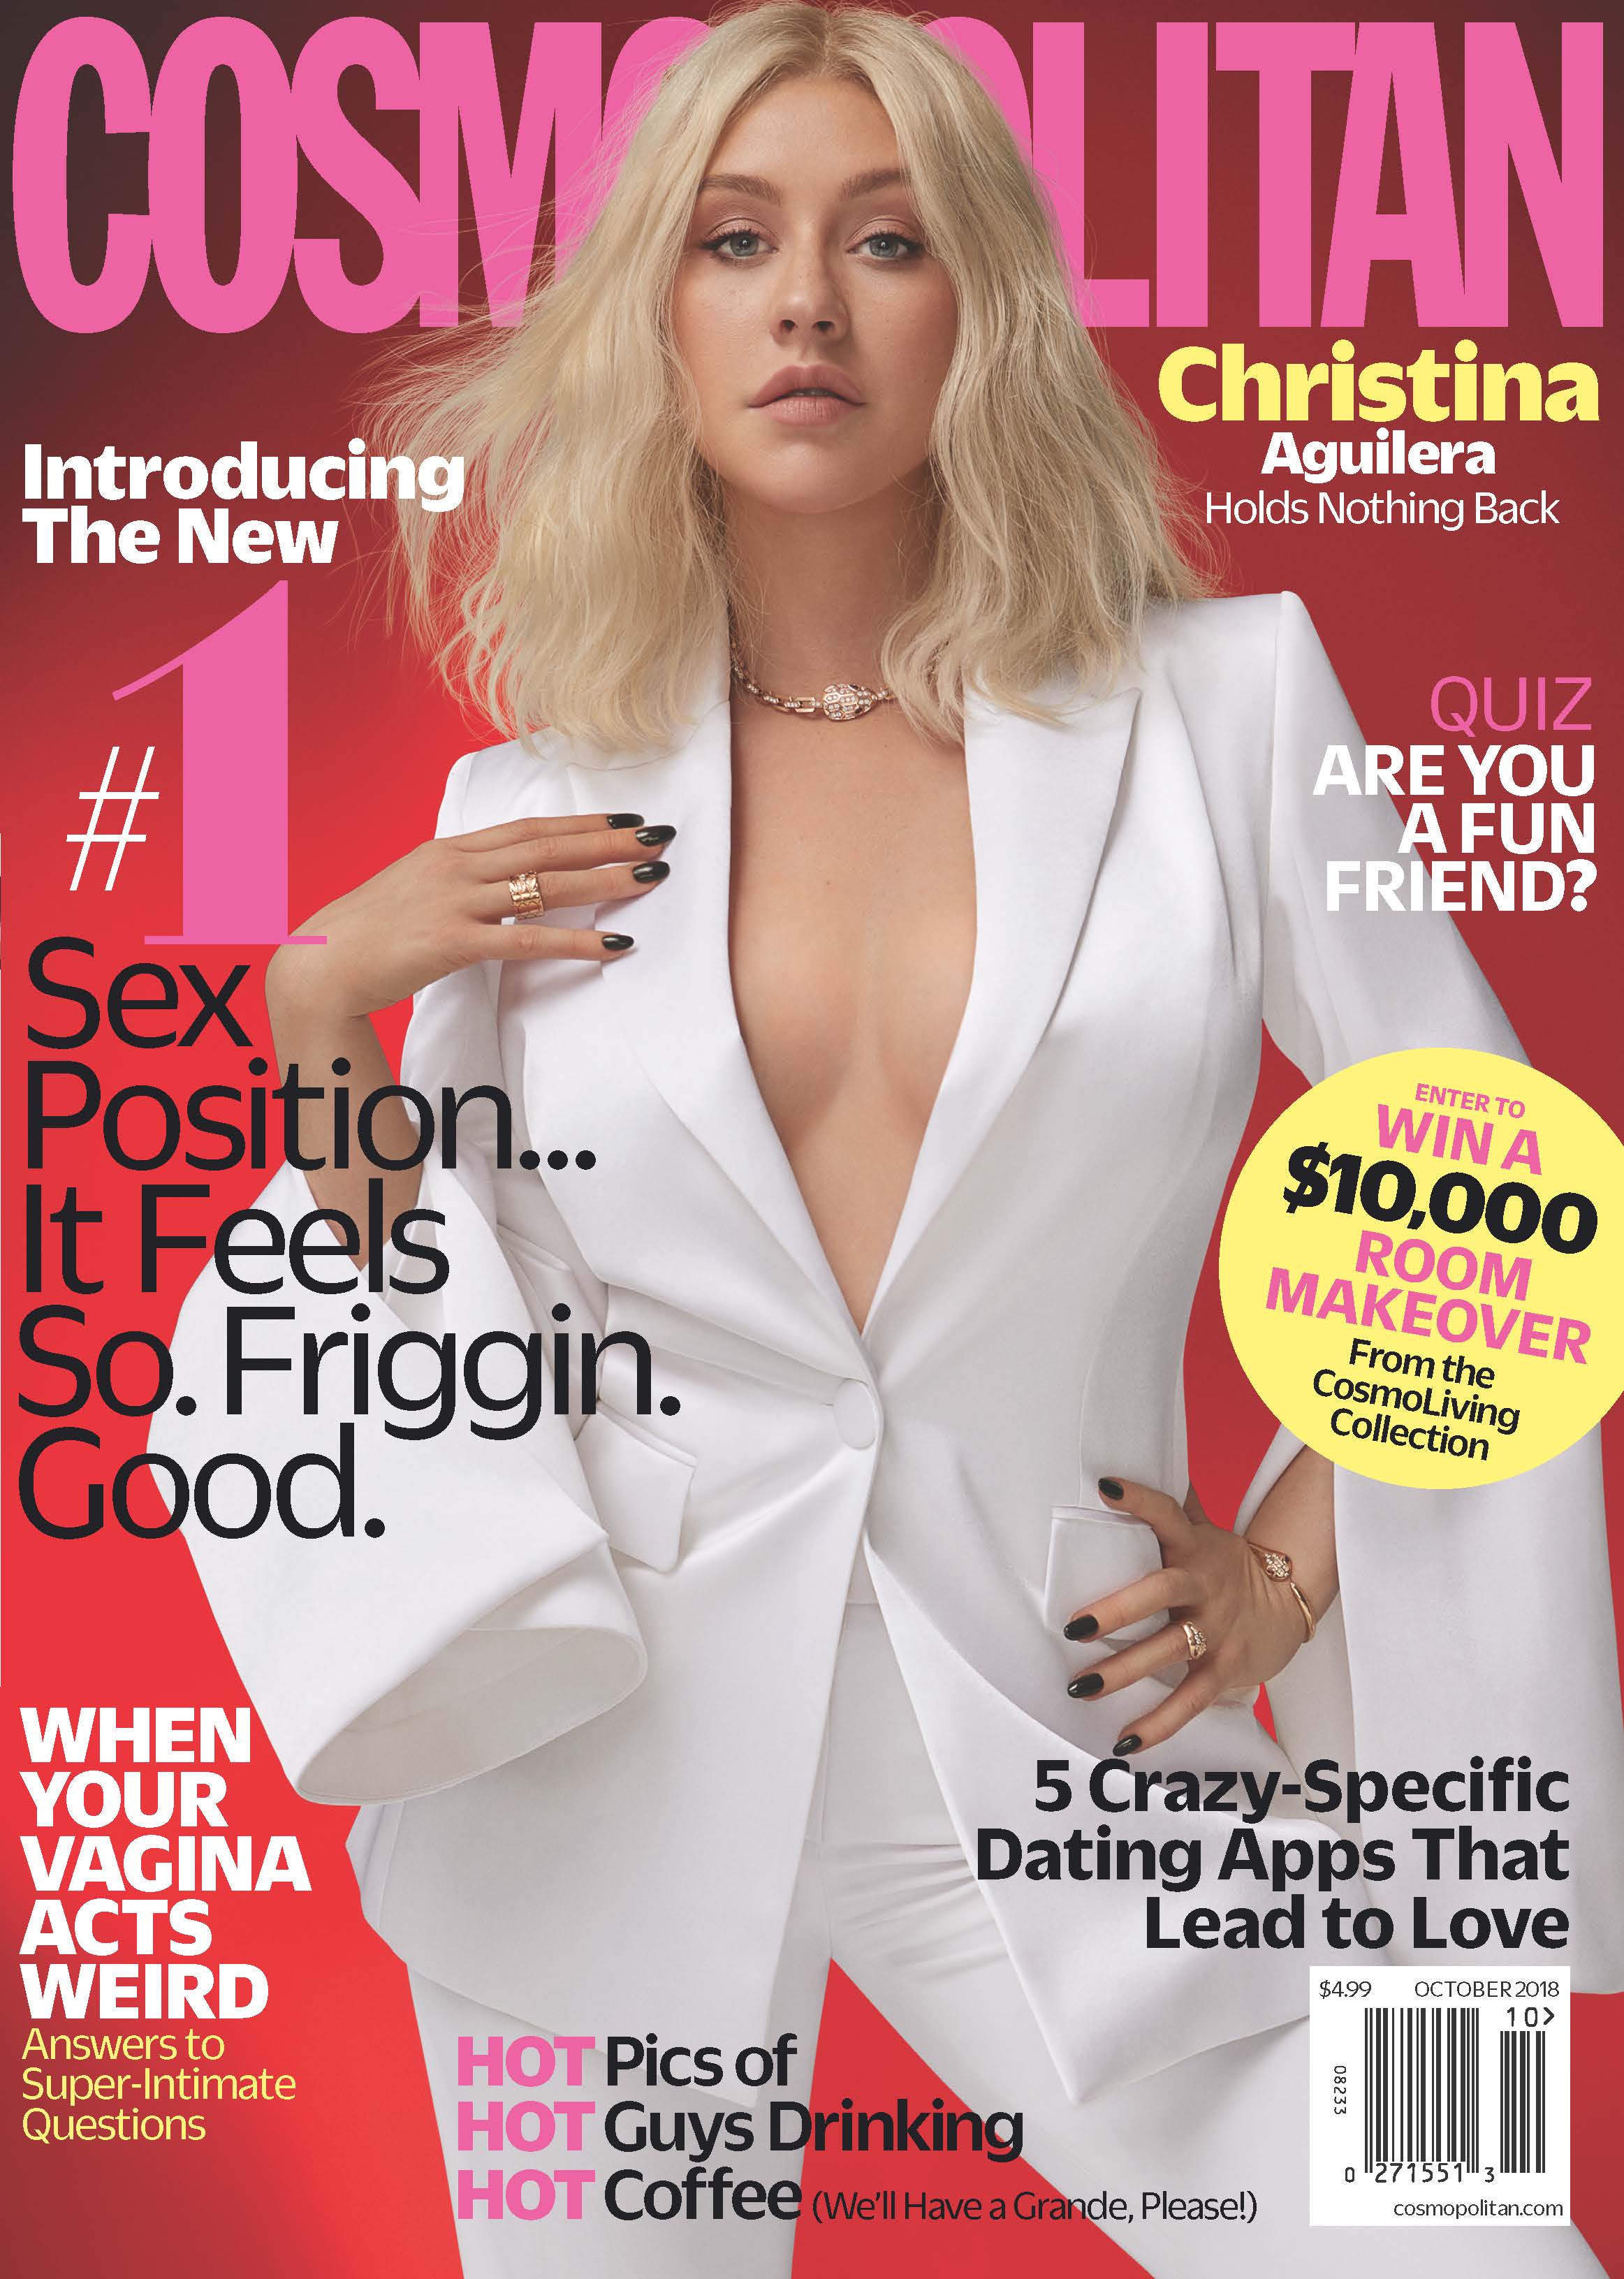 Christina Aguilera on the cover of Cosmopolitan wearing a white Yummie body suit.